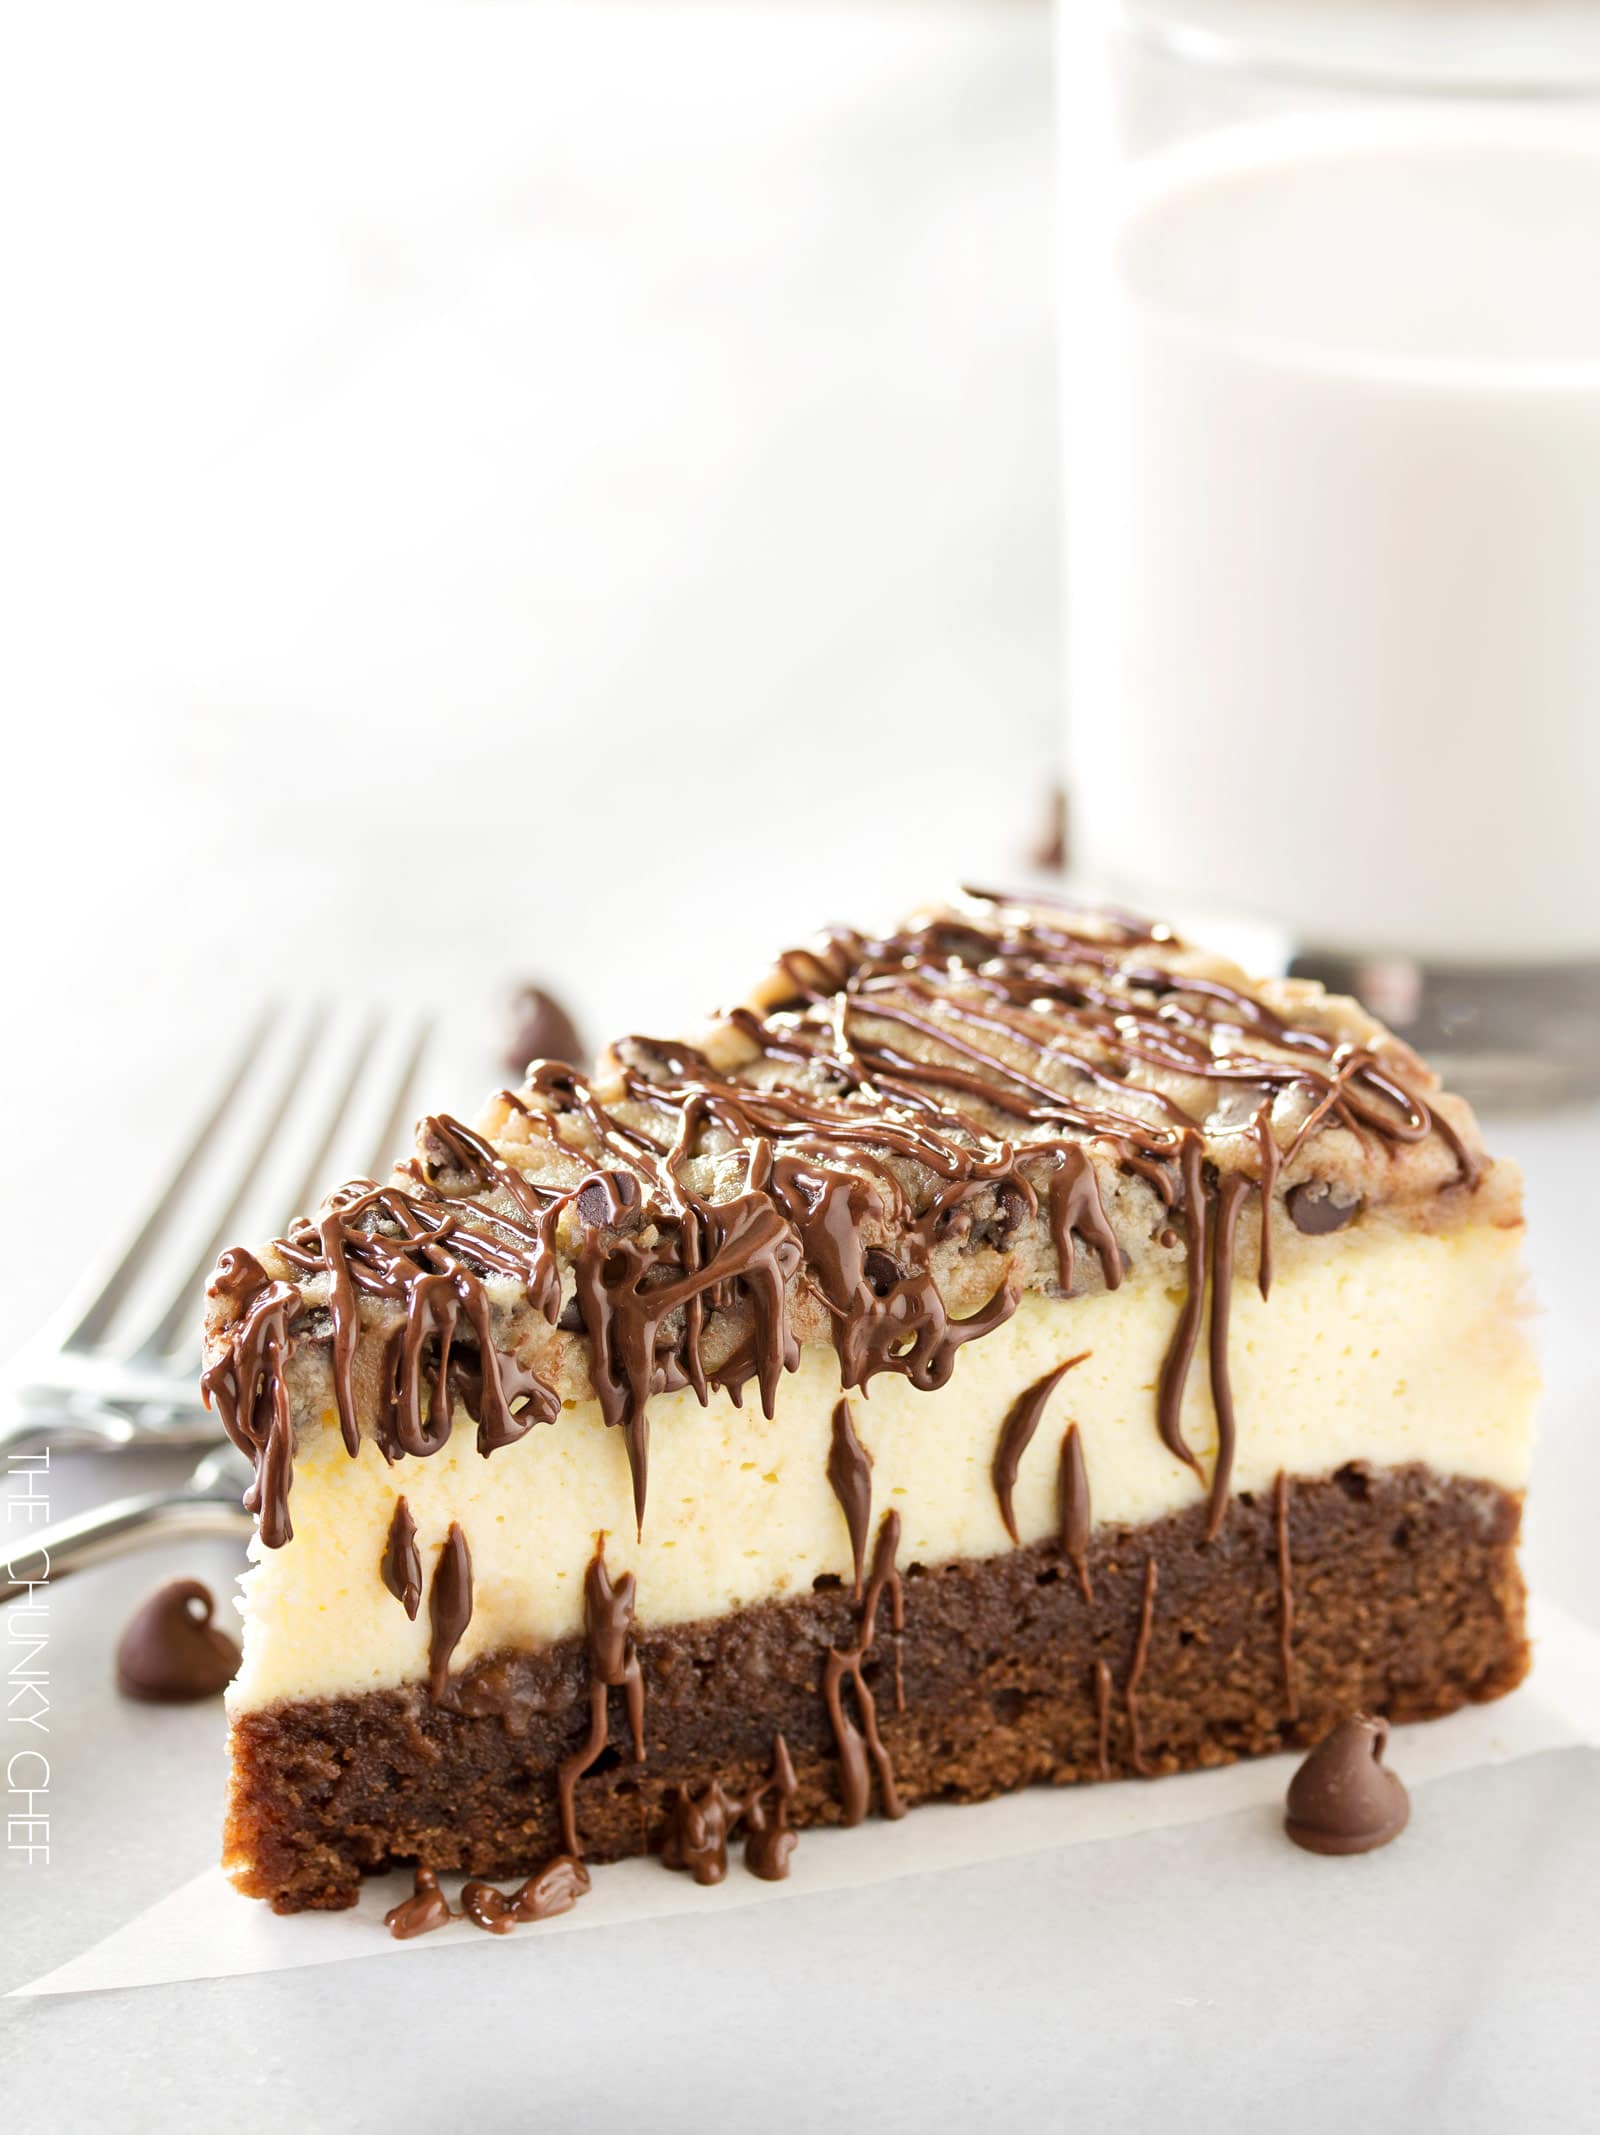 Brownie Bottom Cookie Dough Cheesecake | This impressive, yet super easy, brownie bottom cookie dough cheesecake looks as fancy as any dessert you've had from a restaurant! The ULTIMATE cheesecake for the ULTIMATE dessert lover! | http://thechunkychef.com